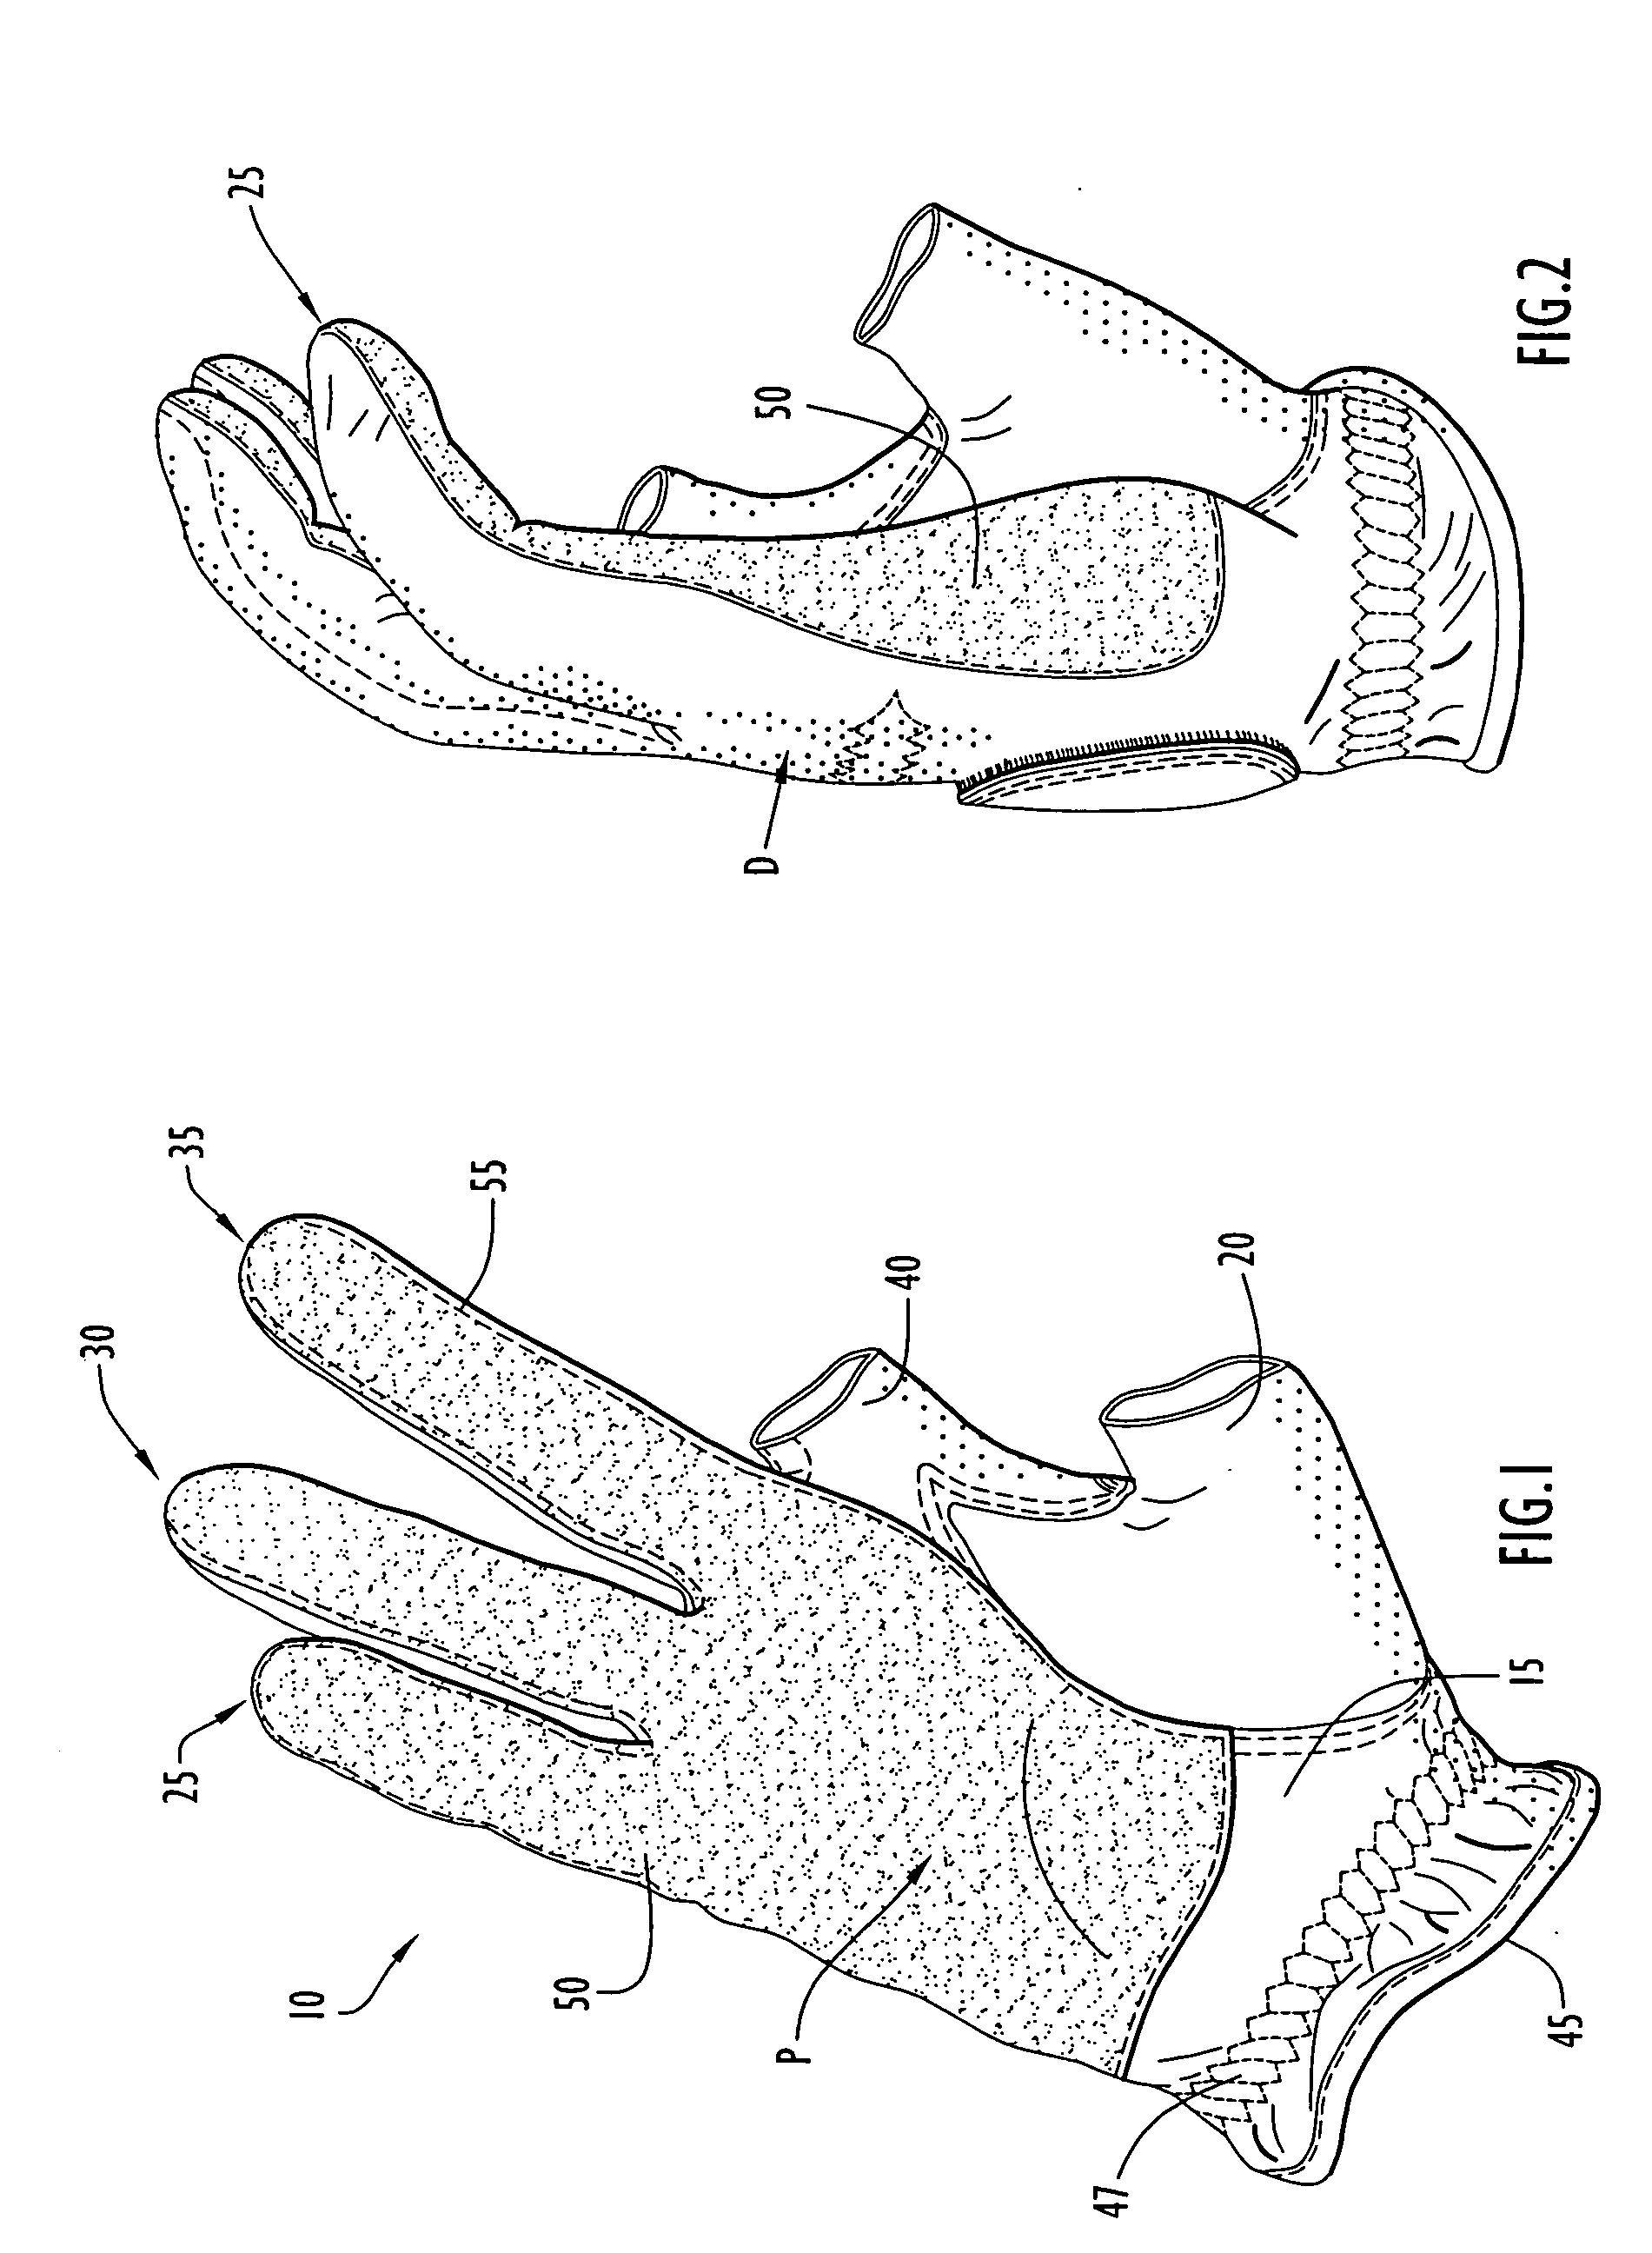 Glove for dry erase surfaces and method of erasure